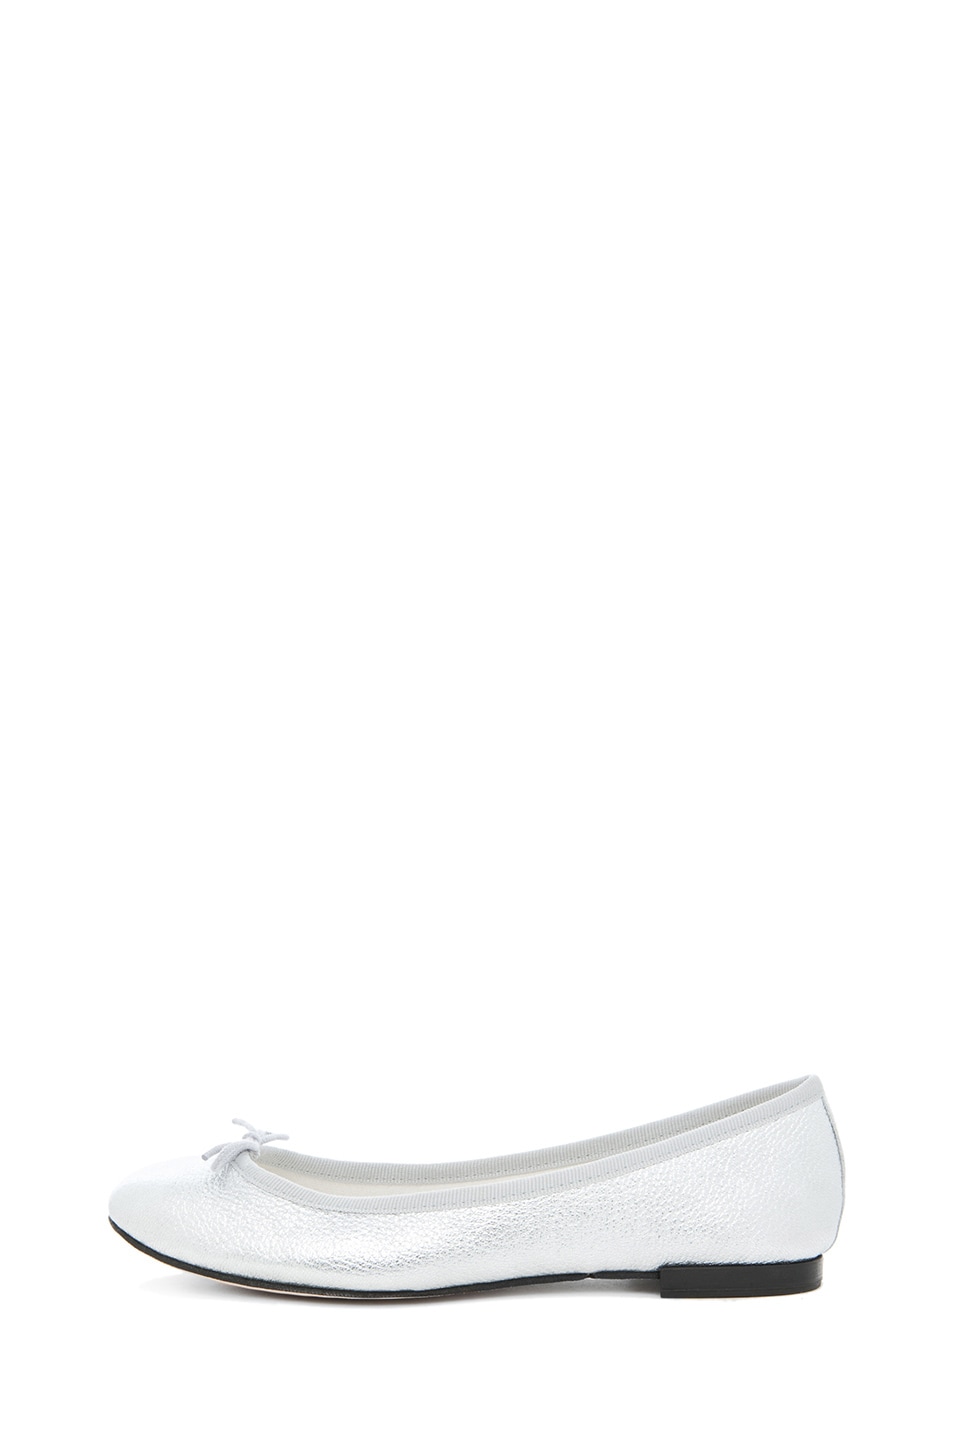 Image 1 of Repetto Leather Flat in Distressed Goatskin Silver